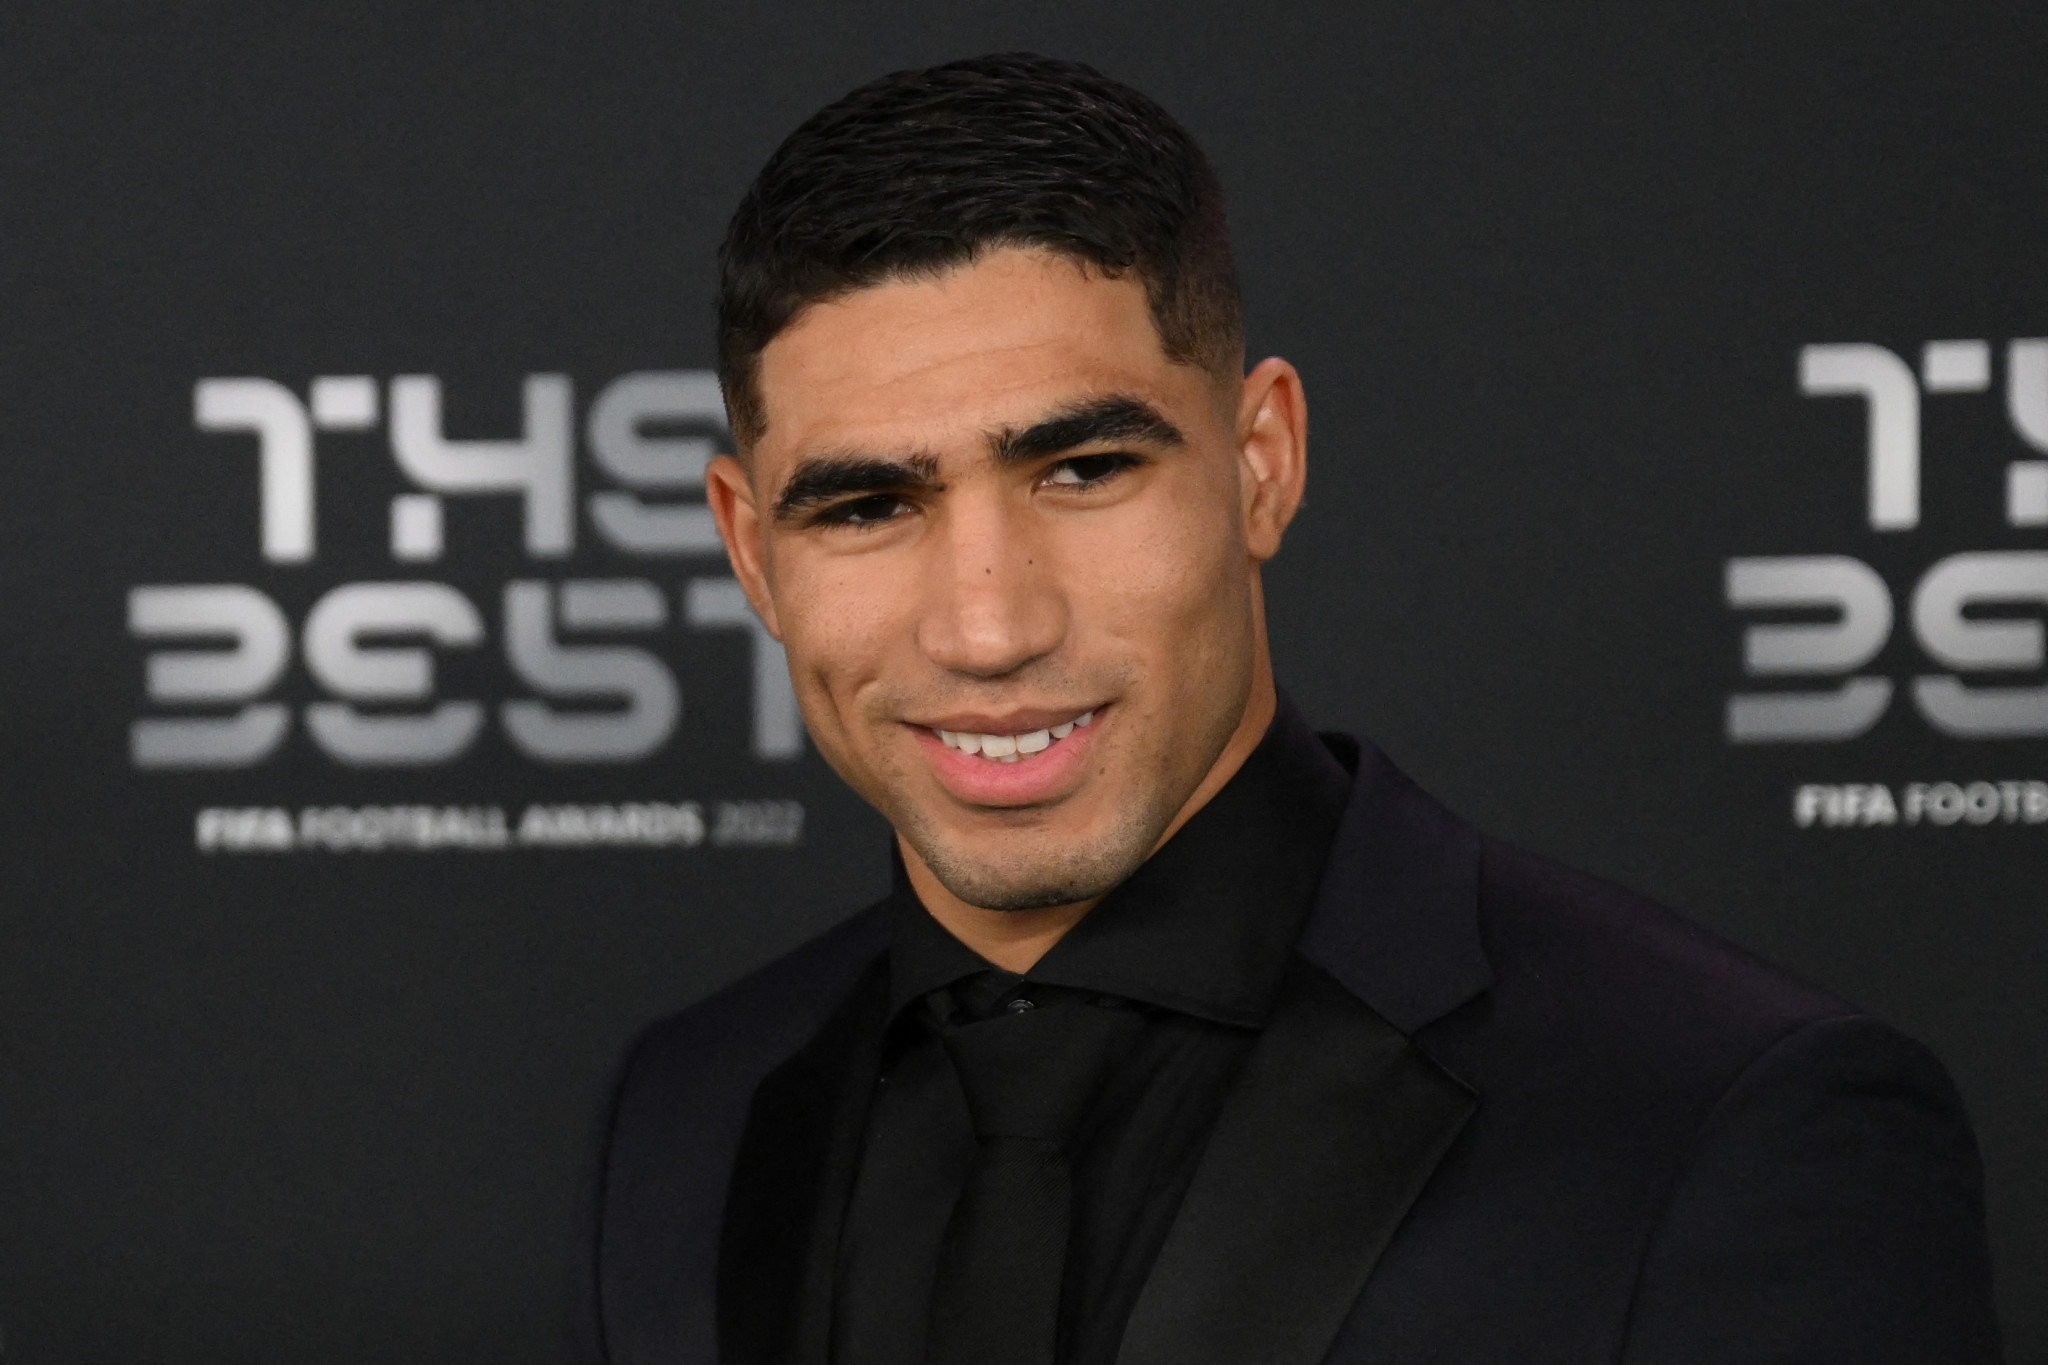 Paris Saint-Germain and Morocco defender Achraf Hakimi has been accused of sexual assault and rape after an alleged incident at the weekend ©Getty Images